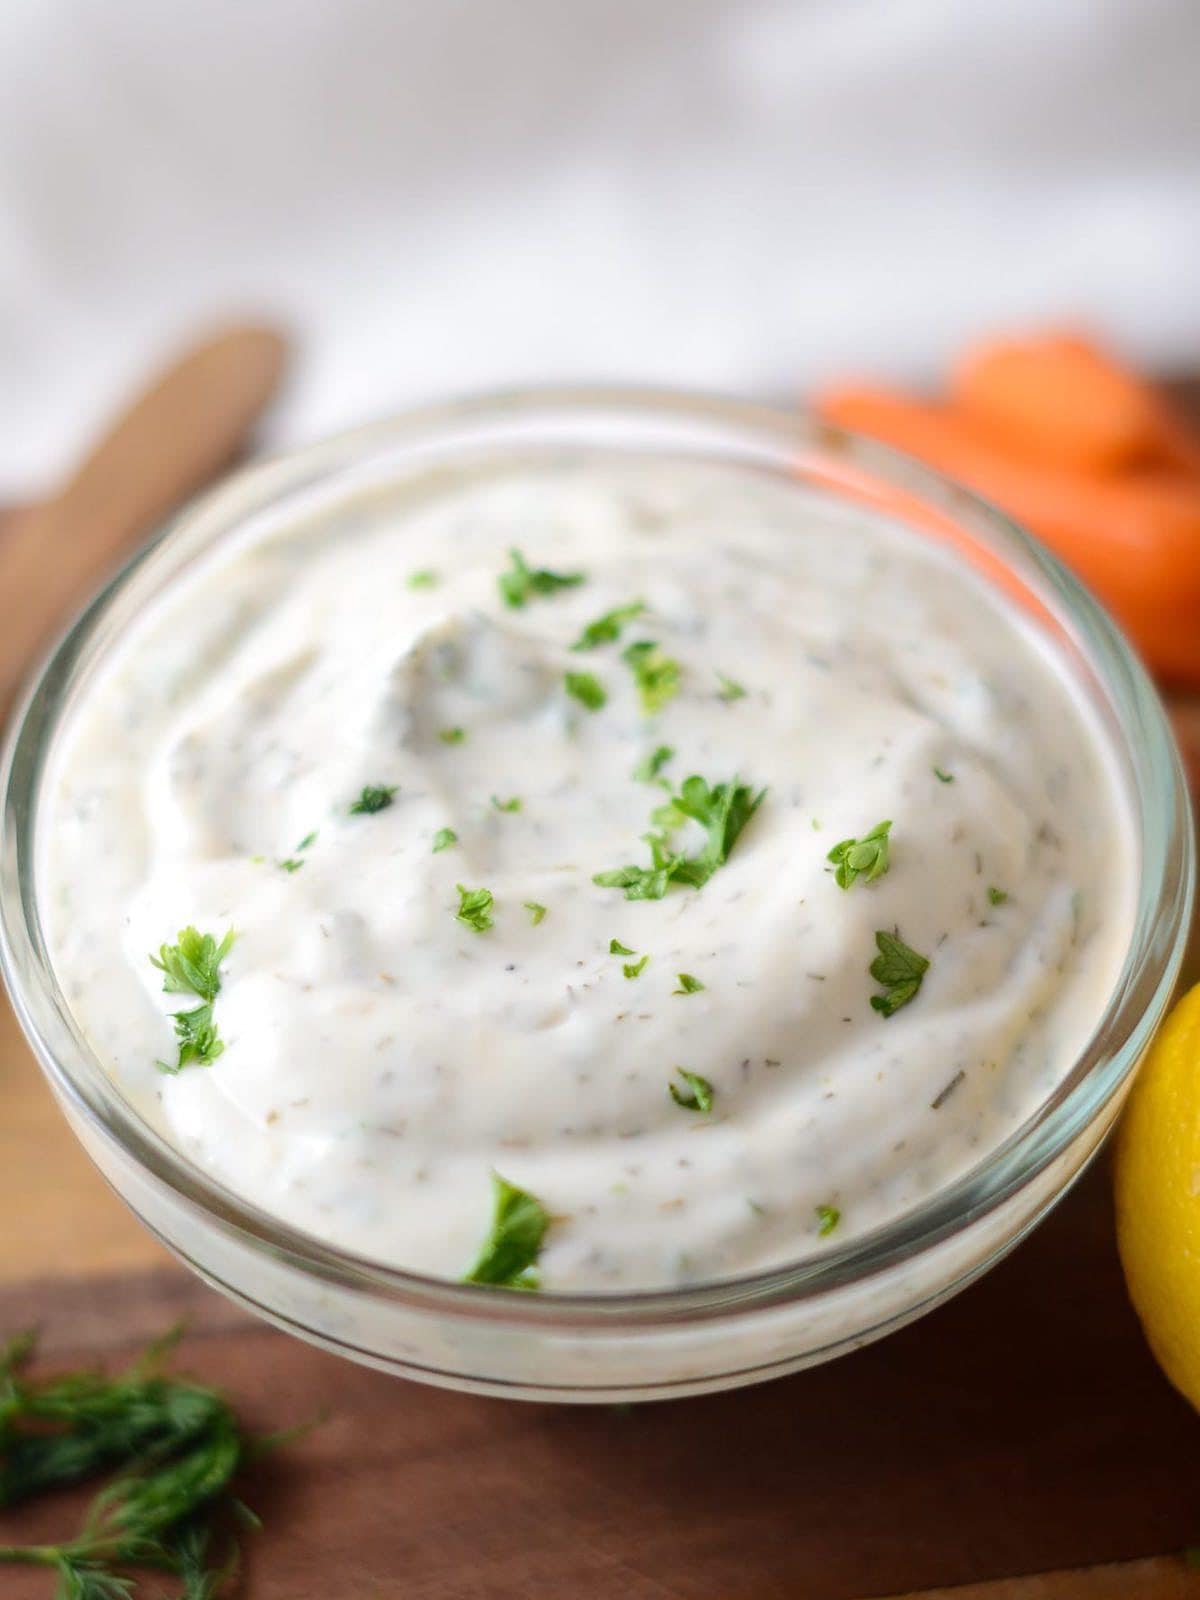 This is a photo of ranch dip close up with parsley on top